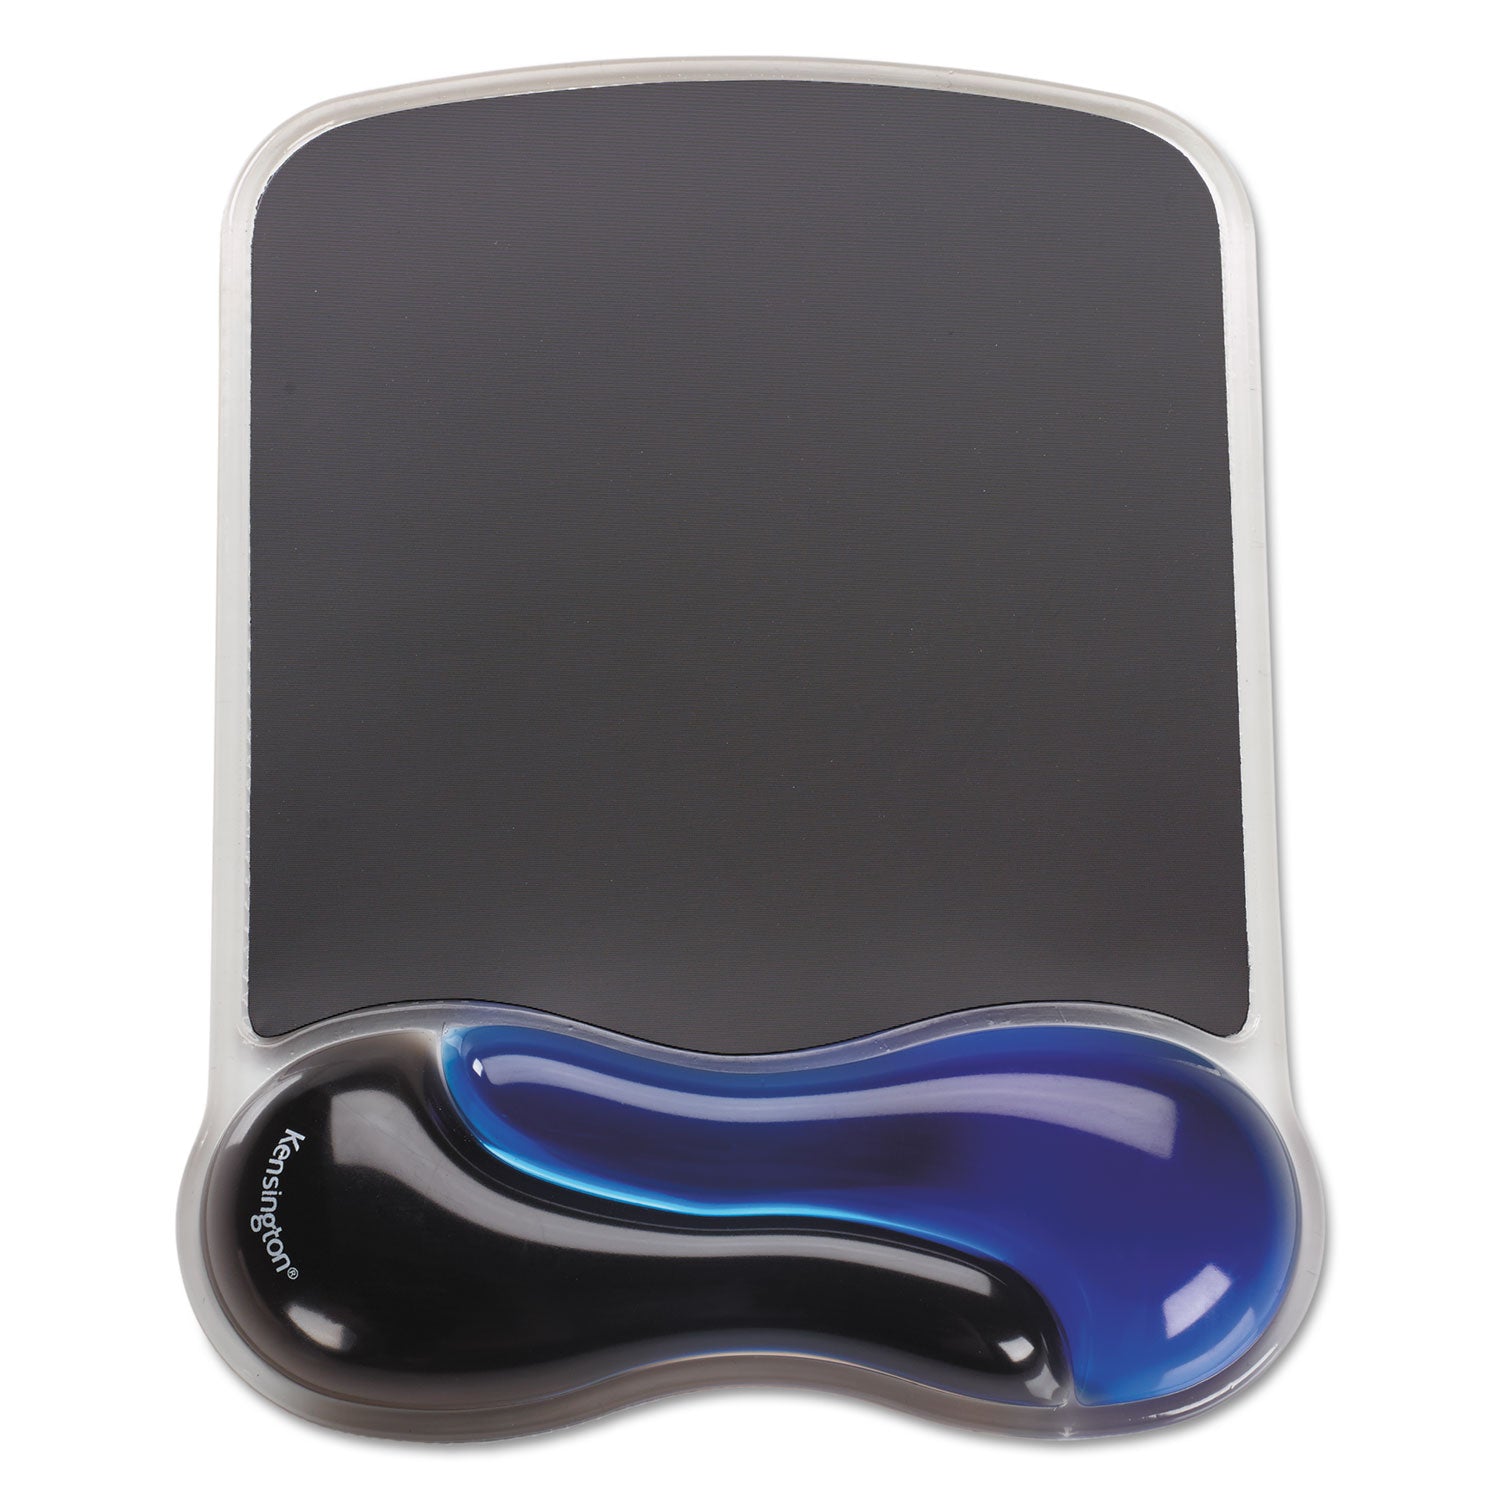 duo-gel-wave-mouse-pad-with-wrist-rest-937-x-13-blue_kmw62401 - 1